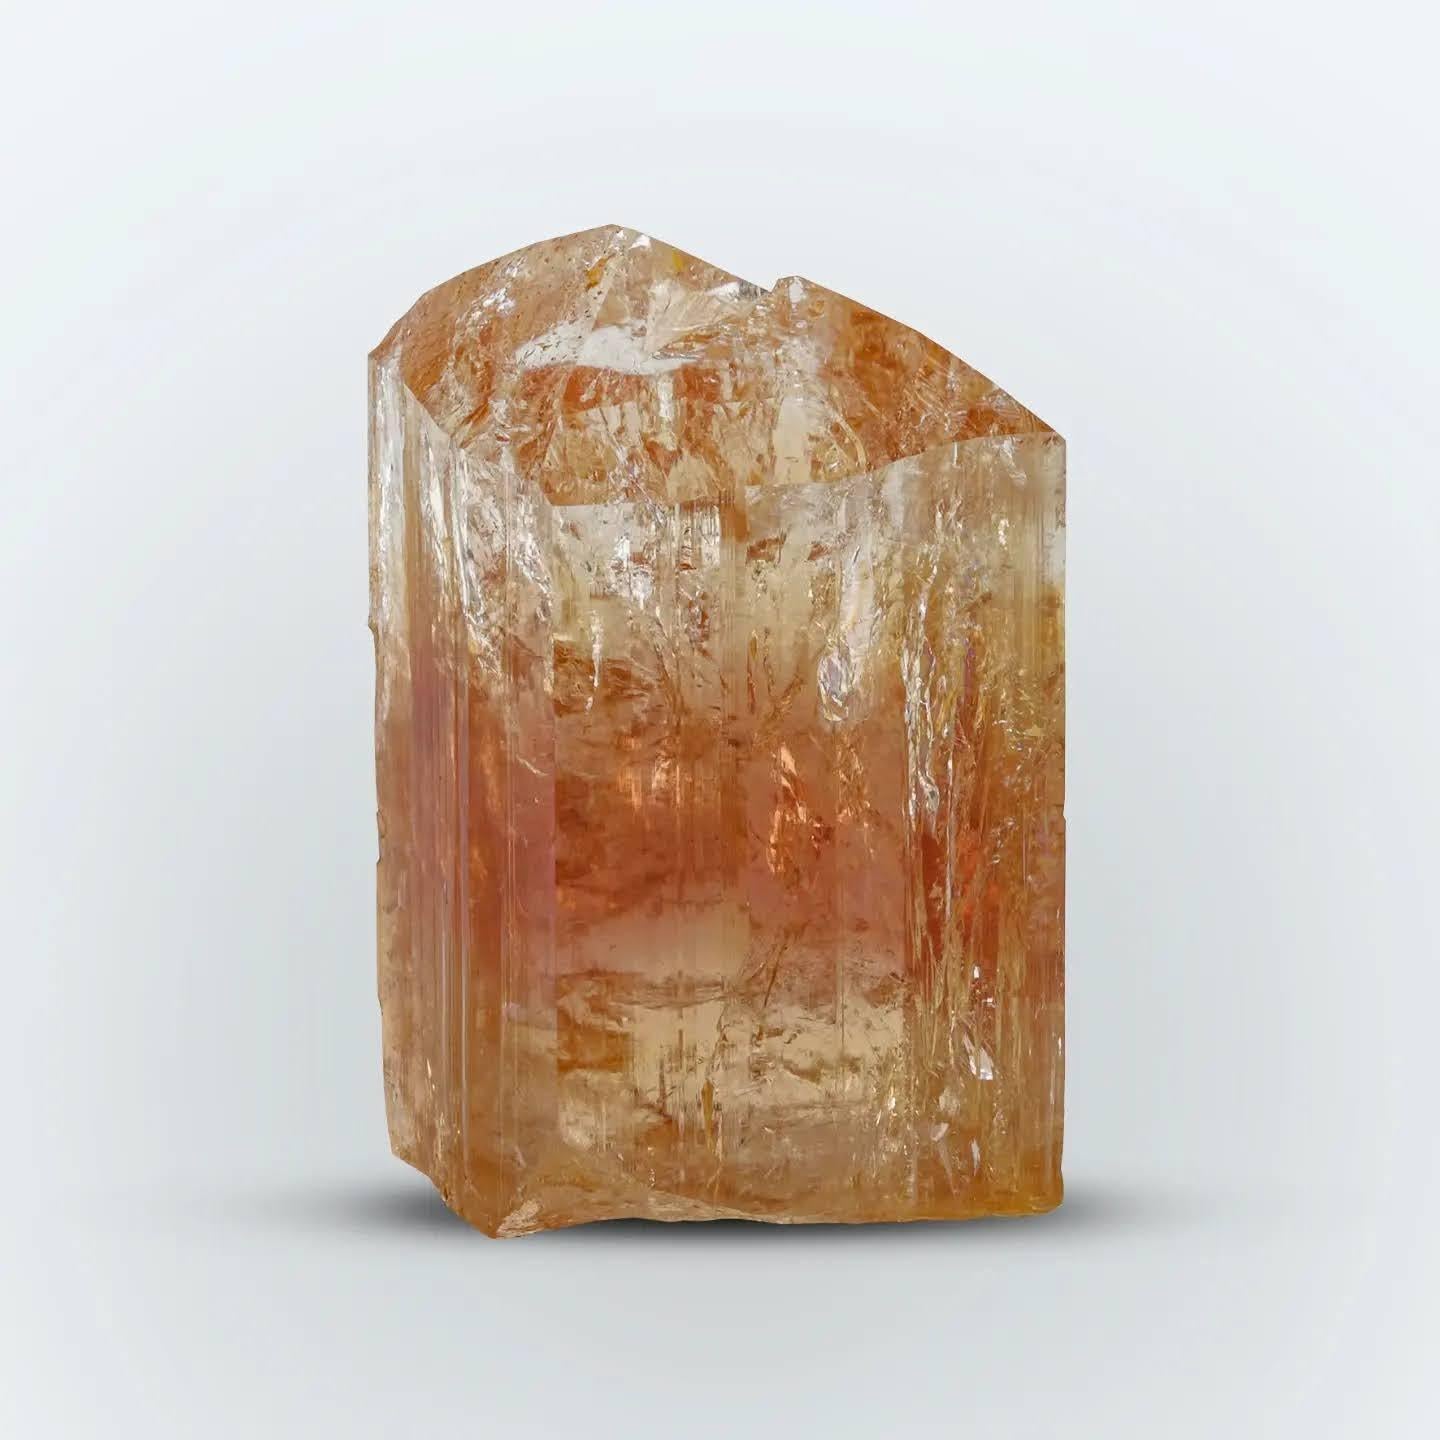 Dim: H: 4.4 x W: 2.5 x D: 2.2 cm 

Wt: 66 g

Specimen Type: Double terminated Topaz with luster 

Treatment: None 

Color: Peach brown 




Nestled within the rugged terrain of Pakistan lies a breathtaking treasure of nature: a magnificent